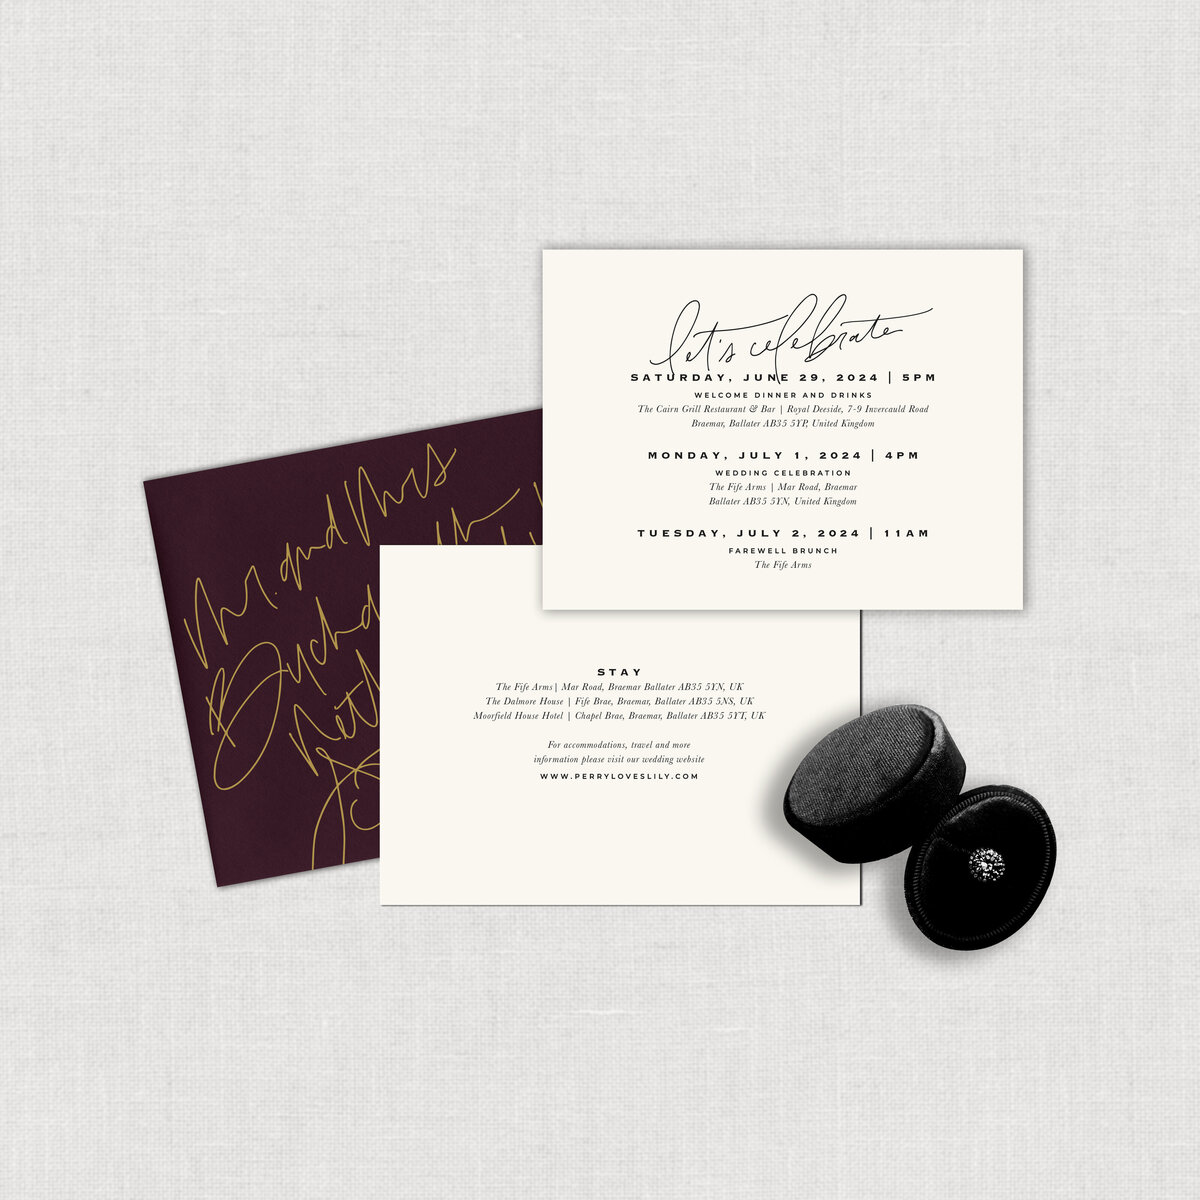 Scottish Wedding destination invite suite double sided detail card with wedding weekend events and a burgundy mailing envelope with gold calligraphy.